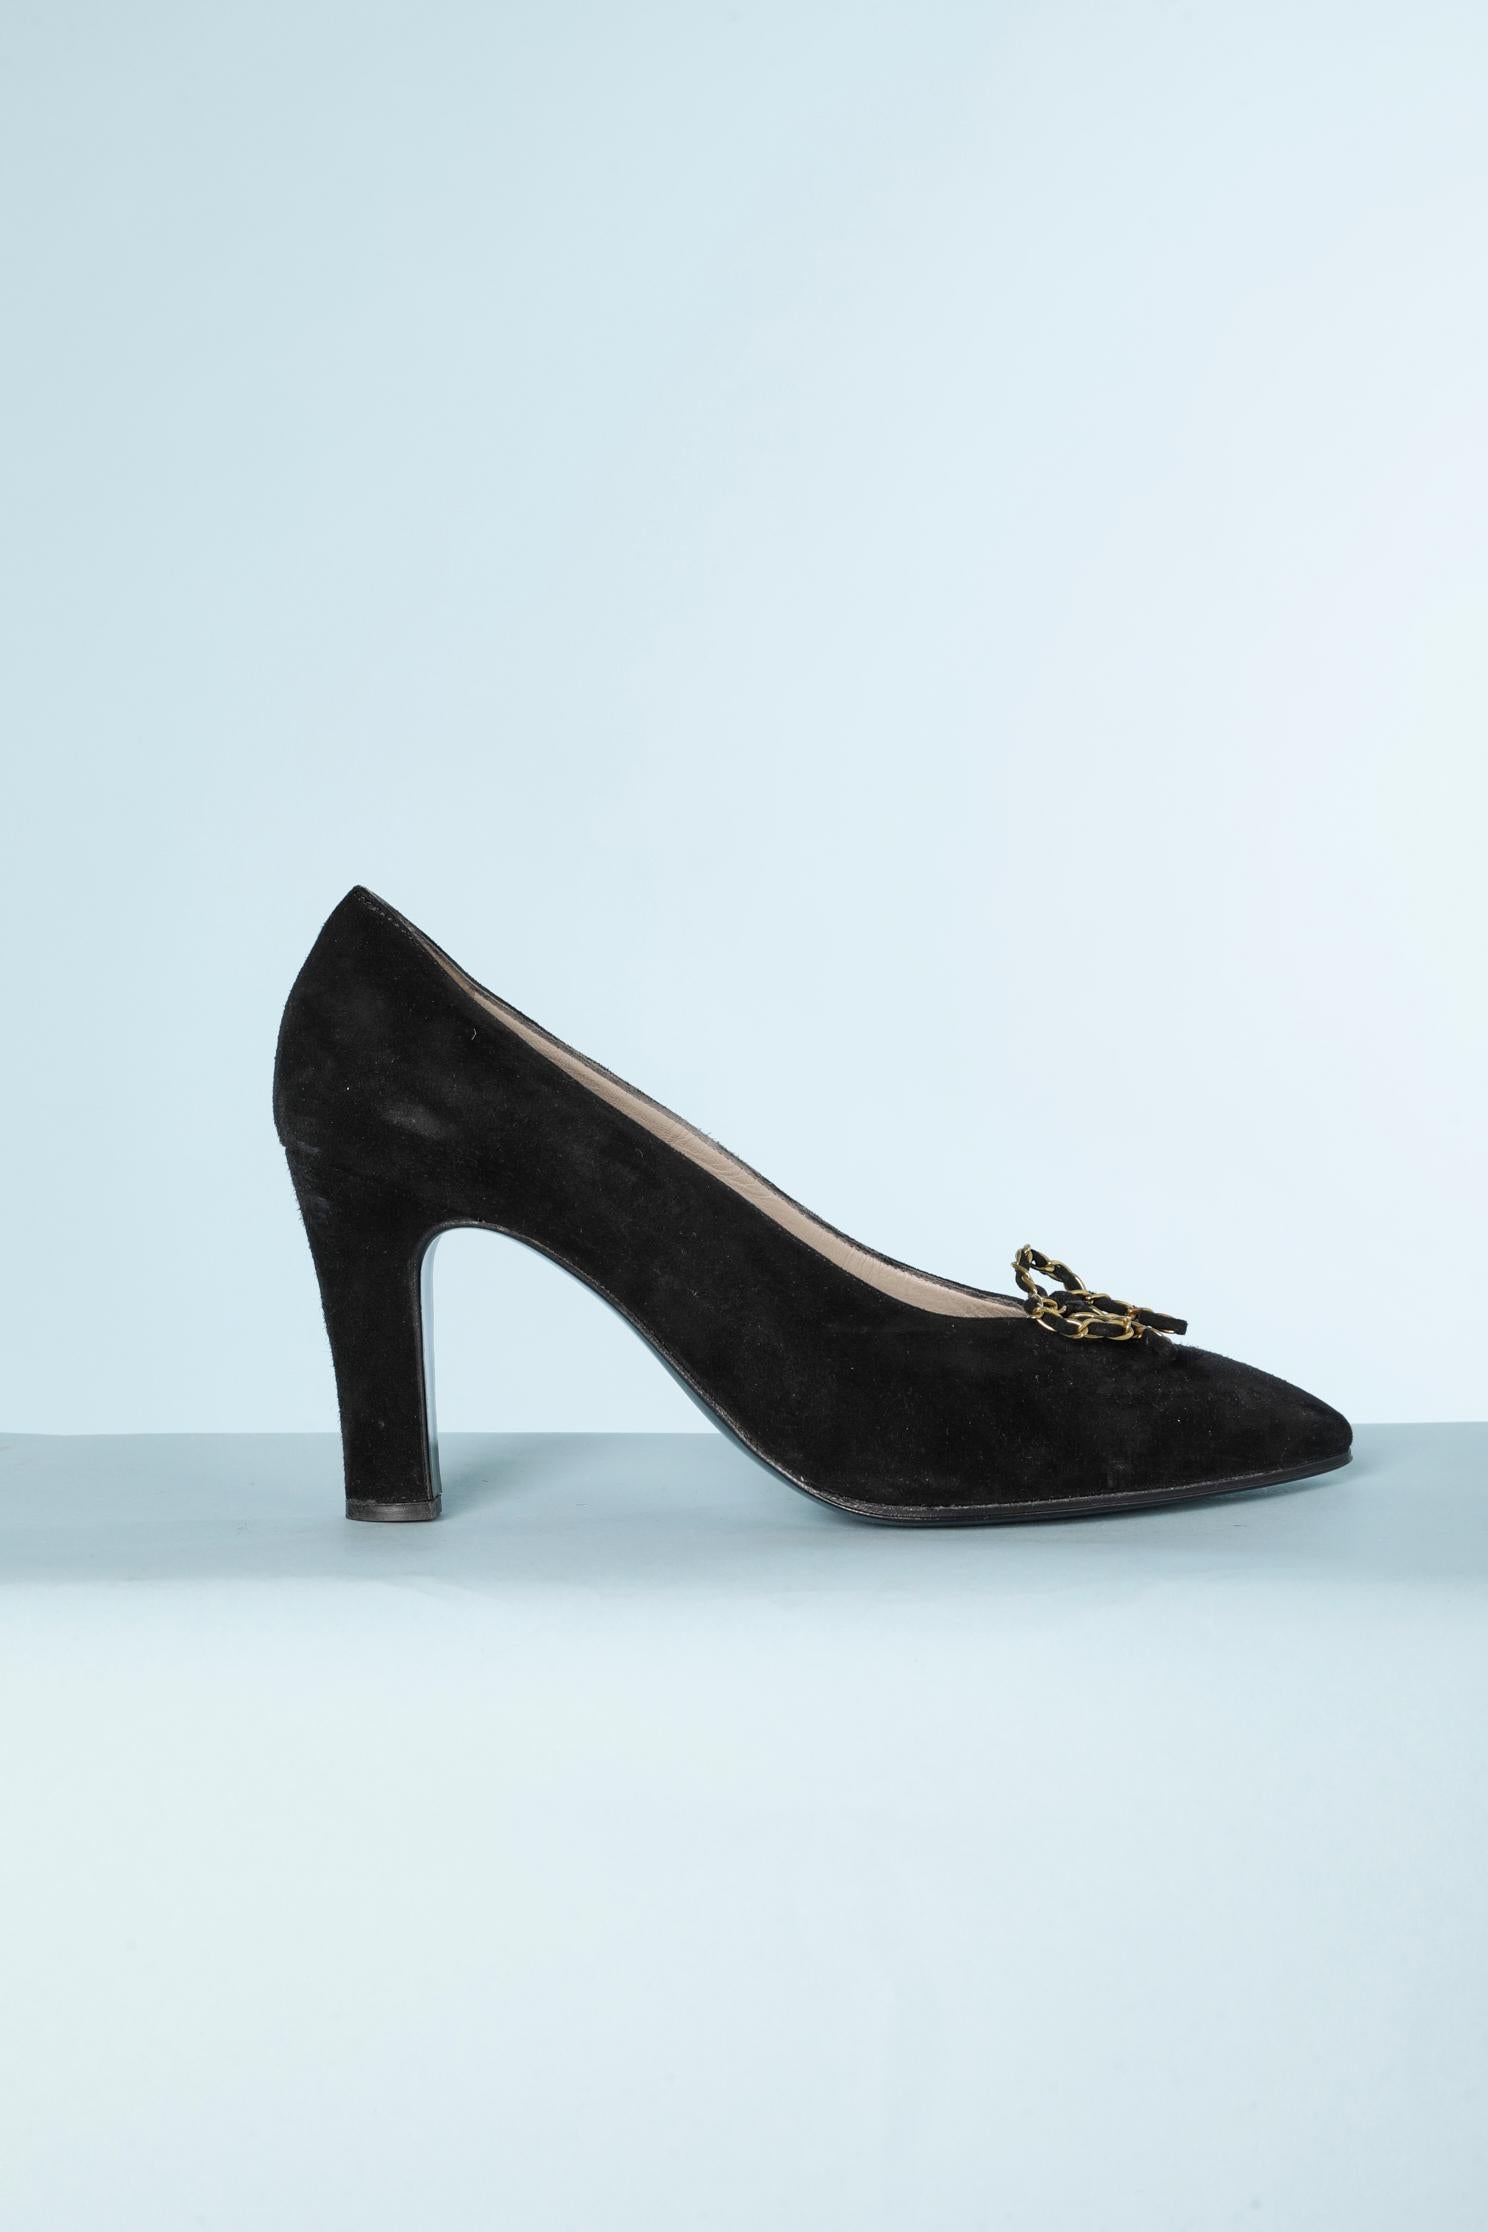 Black suede pump with a gold metal chain and suede  bow.
High of the Heels = 8,5 cm 
Shoes Size : 39 ( It) 